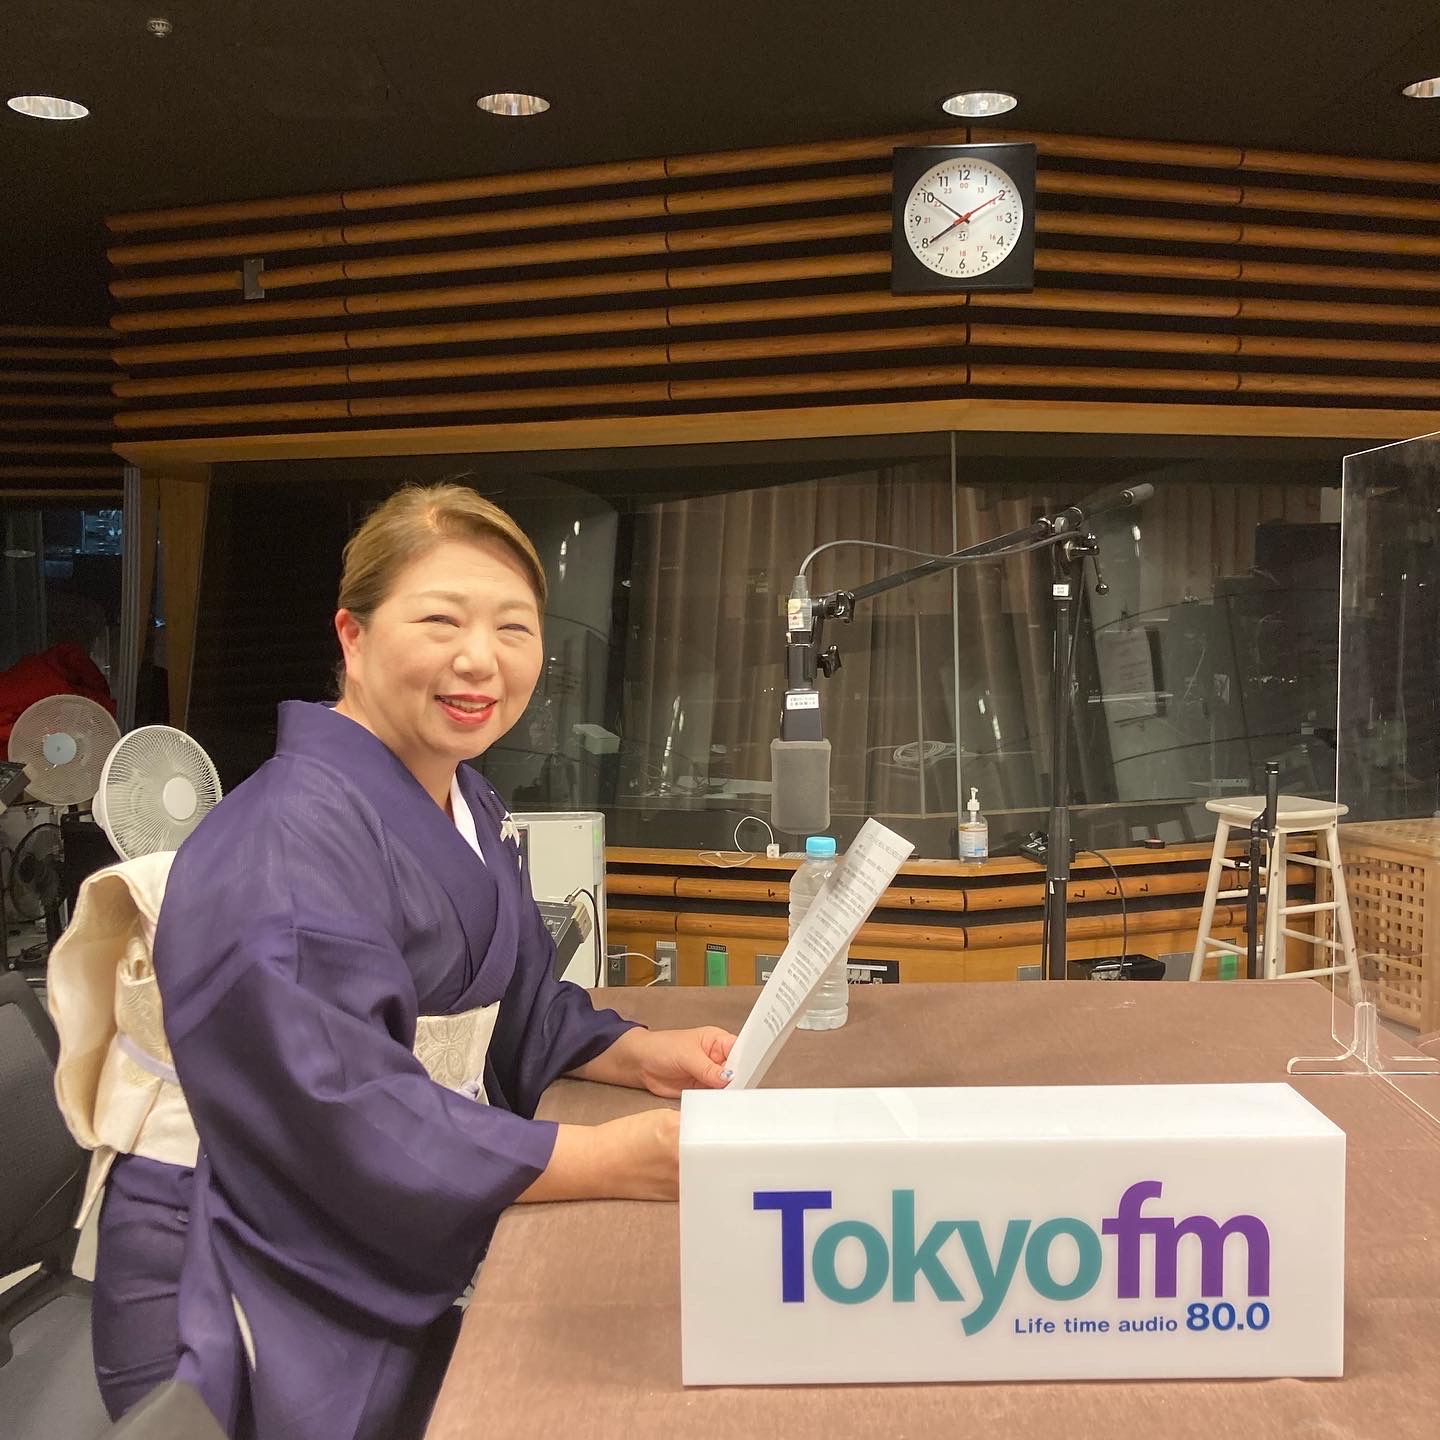 TokyoFm「ビズスタ THE REAL WELLNESS 」に紹介されました。